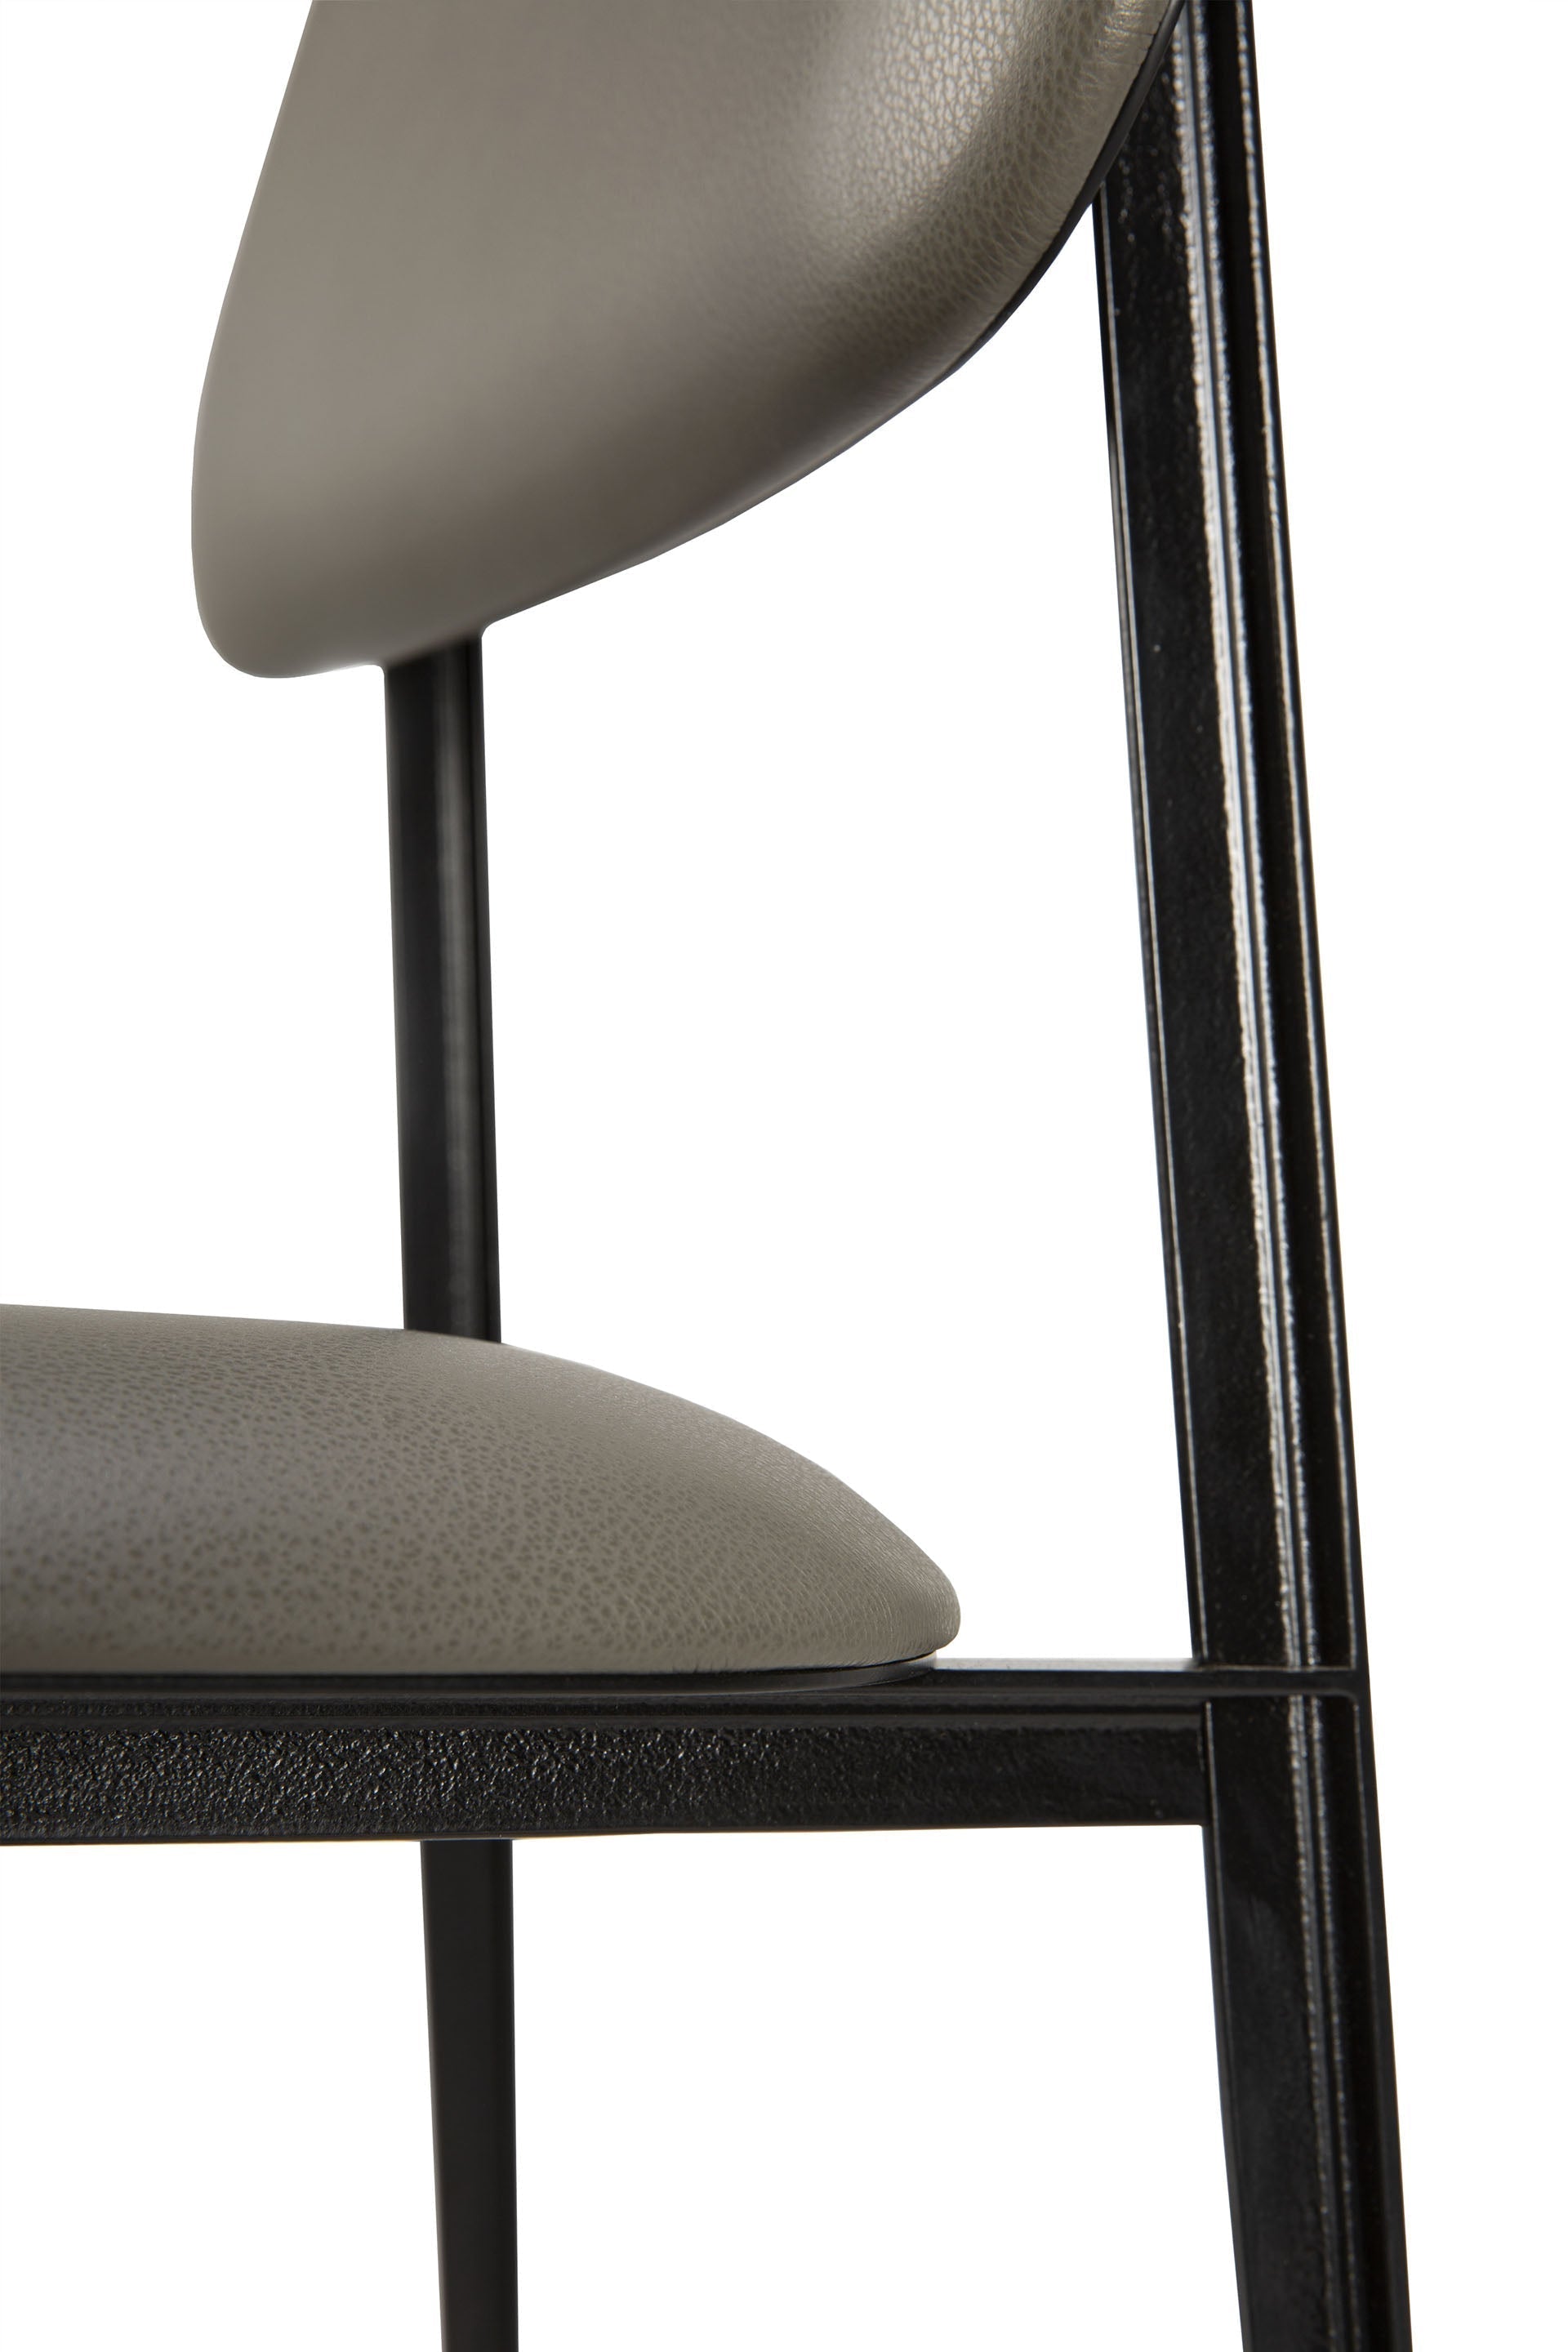 dc dining chair by ethnicraft at adorn.house